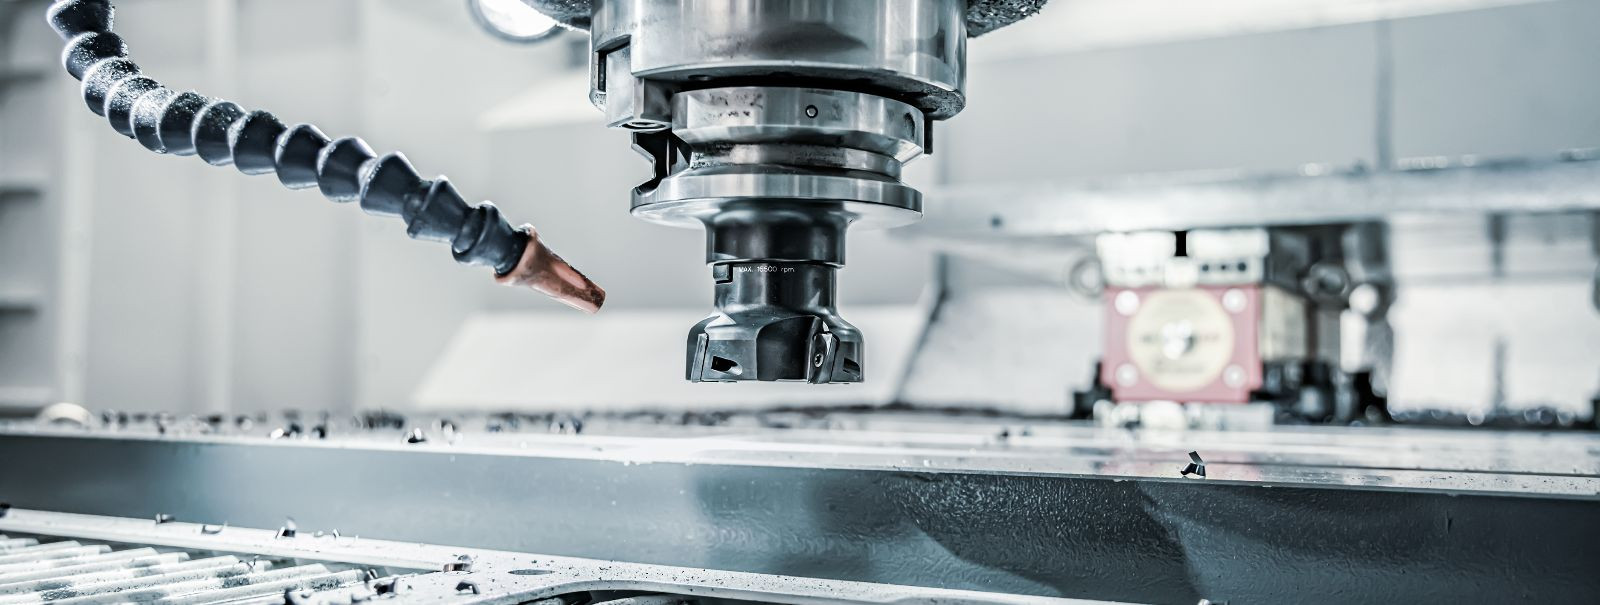 CNC (Computer Numerical Control) lathe processing stands at the forefront of modern machining, offering unparalleled precision and repeatability. This technolog